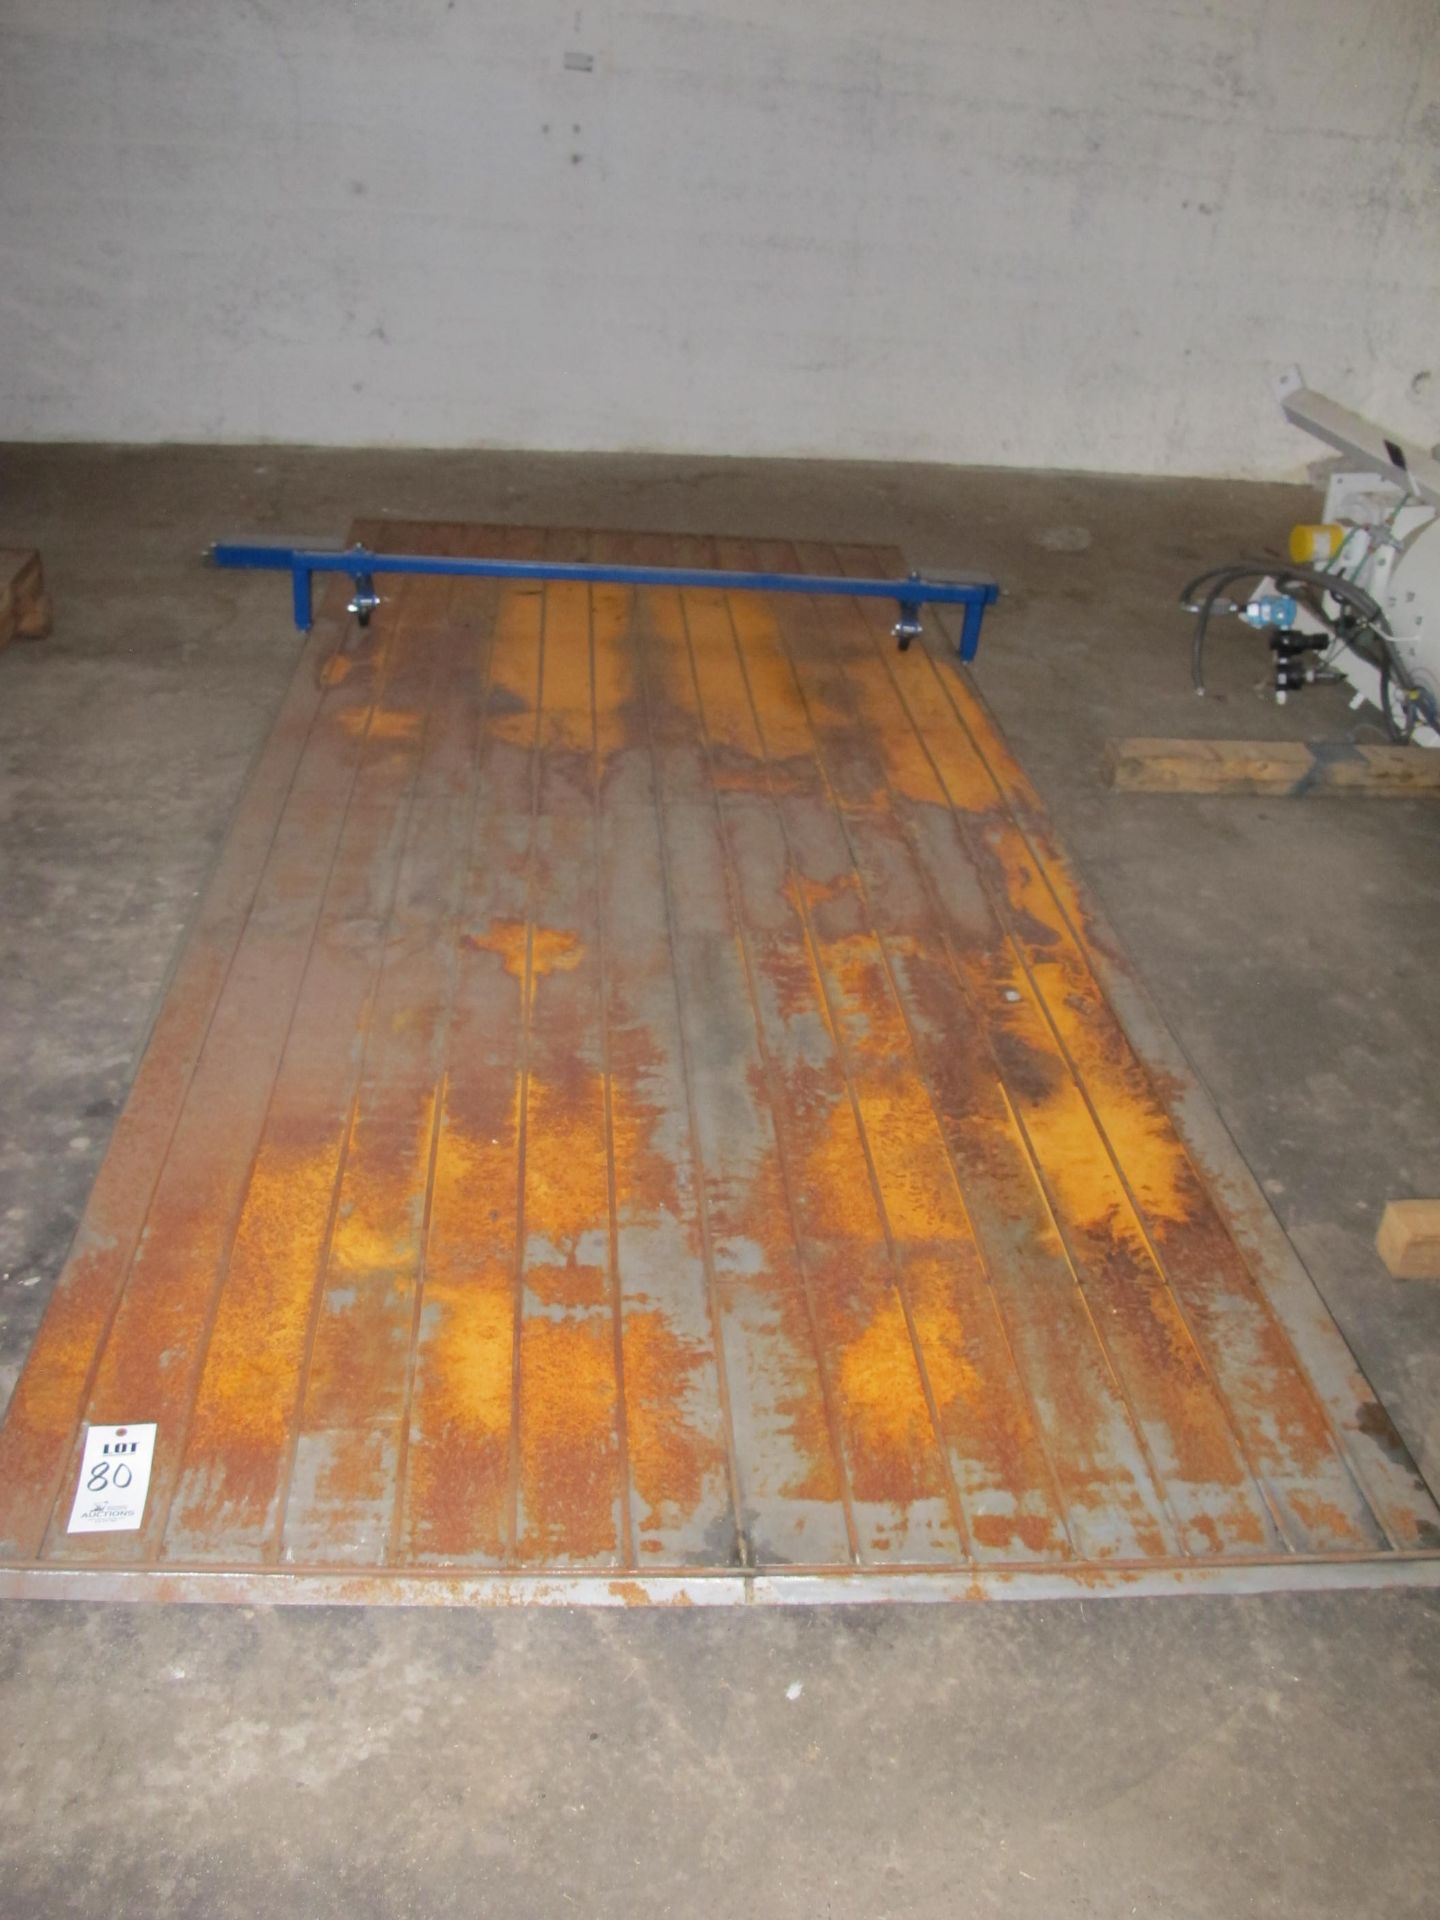 MISC. STEEL STRUCTURES AND ELECTRICAL, LOADING & HANDLING FEE: $600 - Image 14 of 14